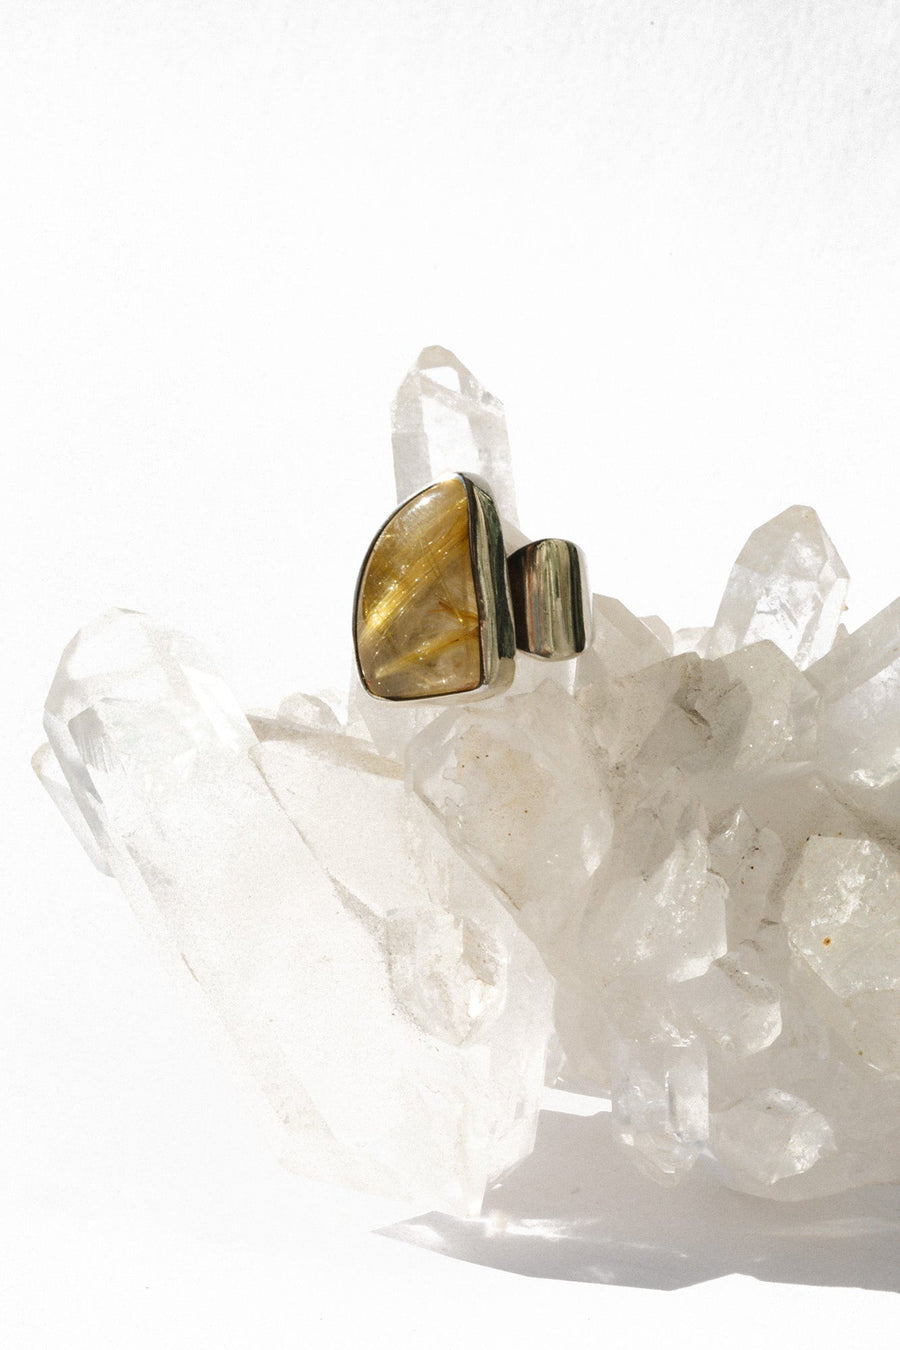 Starborn Creations Jewelry US 7 / Silver Golden Hue Rutilated Quartz Ring